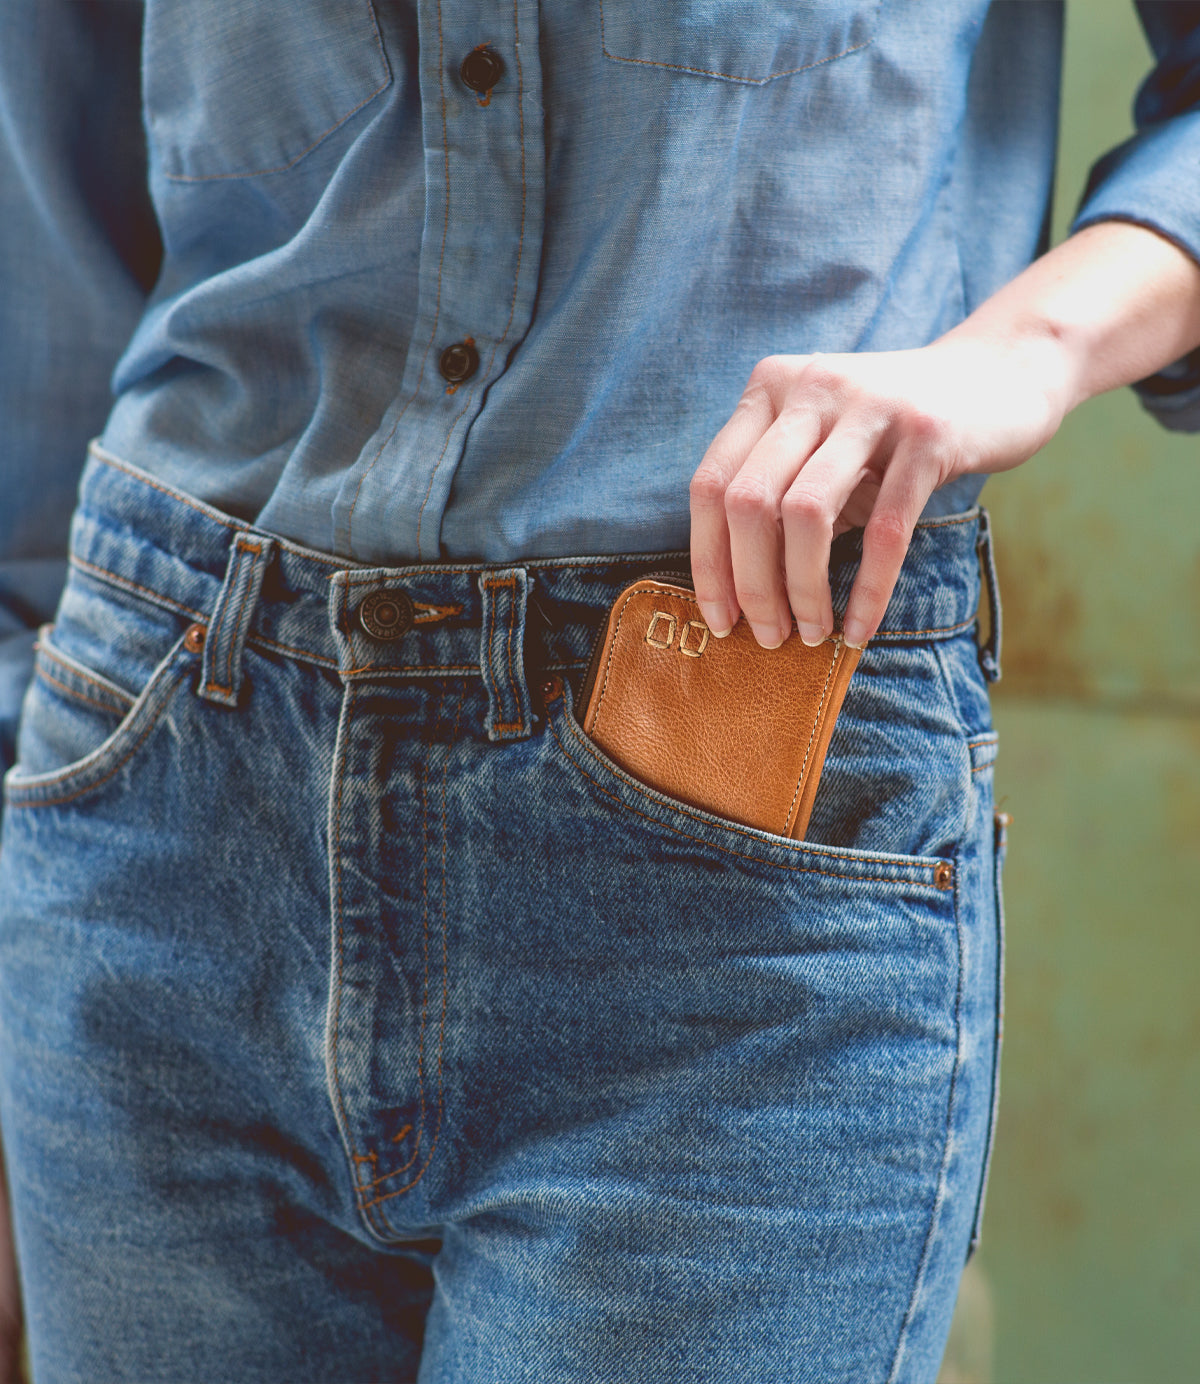 A woman is carrying a Bed Stu Carrie compact wallet in her jeans pocket, containing her necessities.